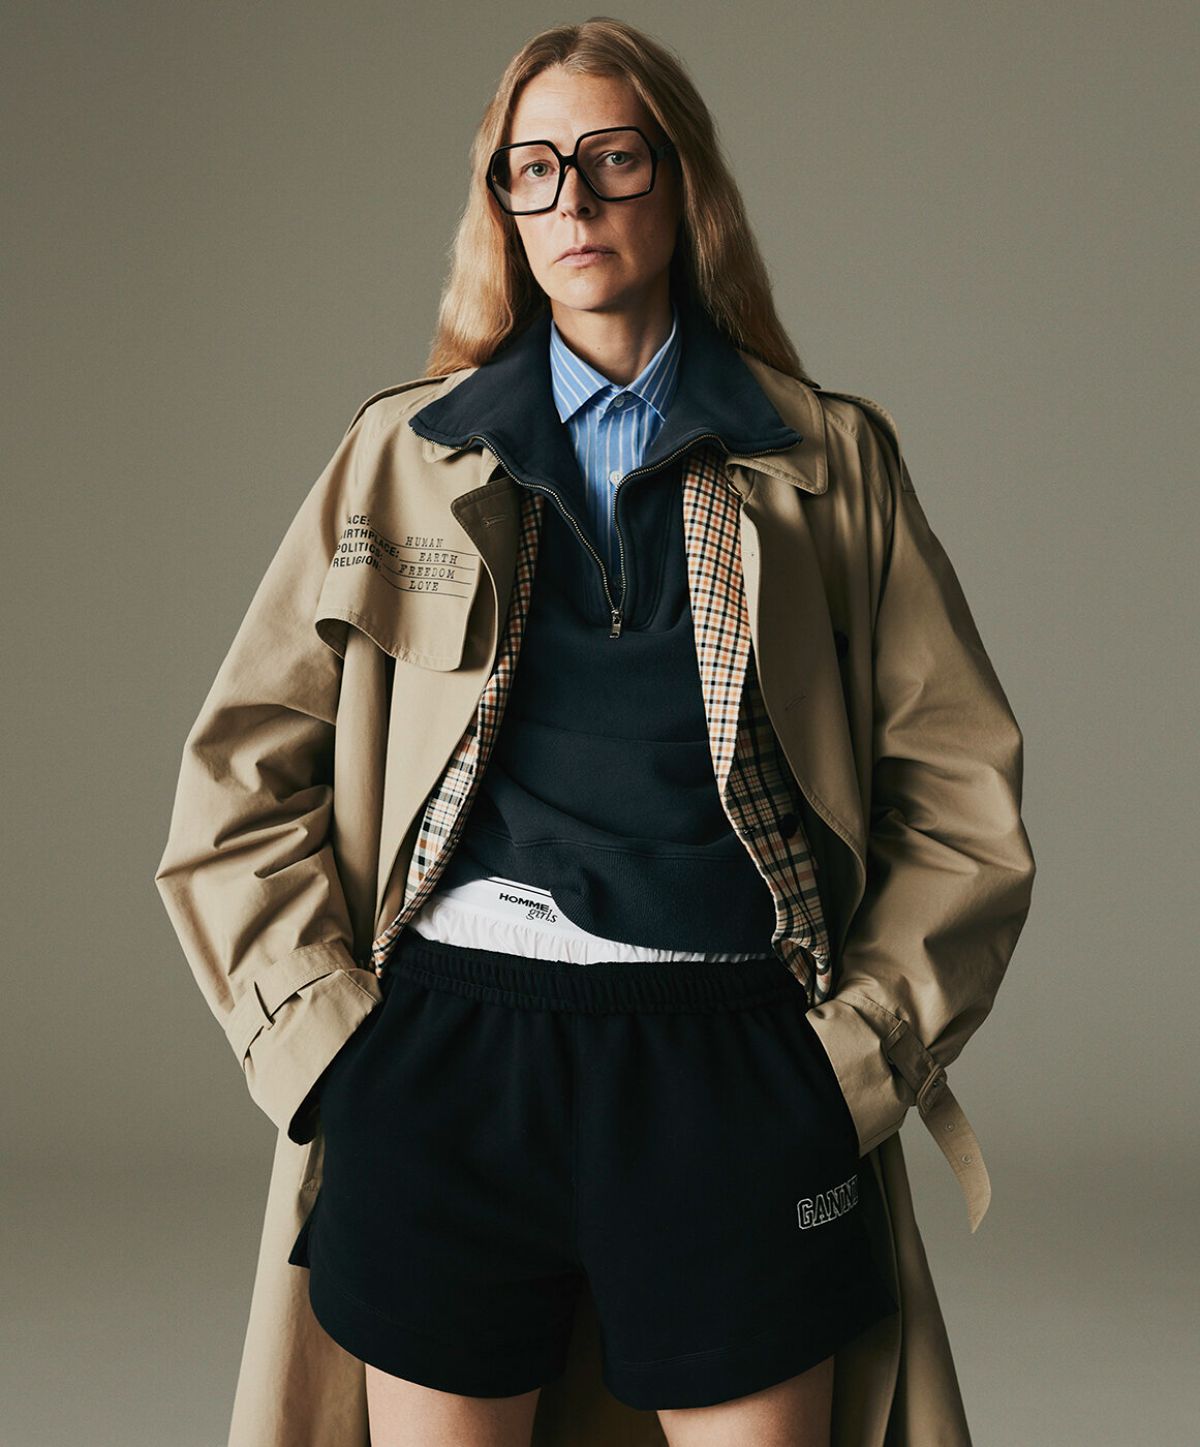 Hybrid Dressing: Laura Morgan by Sarah Piantadosi for Matches Fashion Fall-Winter 2021 Ad Campaign. Clothing & Accessories: Vetements Neutral Human Identity belted cotton-blend trench coat / Another Tomorrow White Single-breasted organic-cotton blend jacket / HommeGirls Blue Cropped striped cotton-poplin shirt / HommeGirls White Logo-waistband cotton pyjama shorts / Ganni Navy Software organic cotton-blend track shorts / Celine Eyewear Black Oversized square acetate glasses